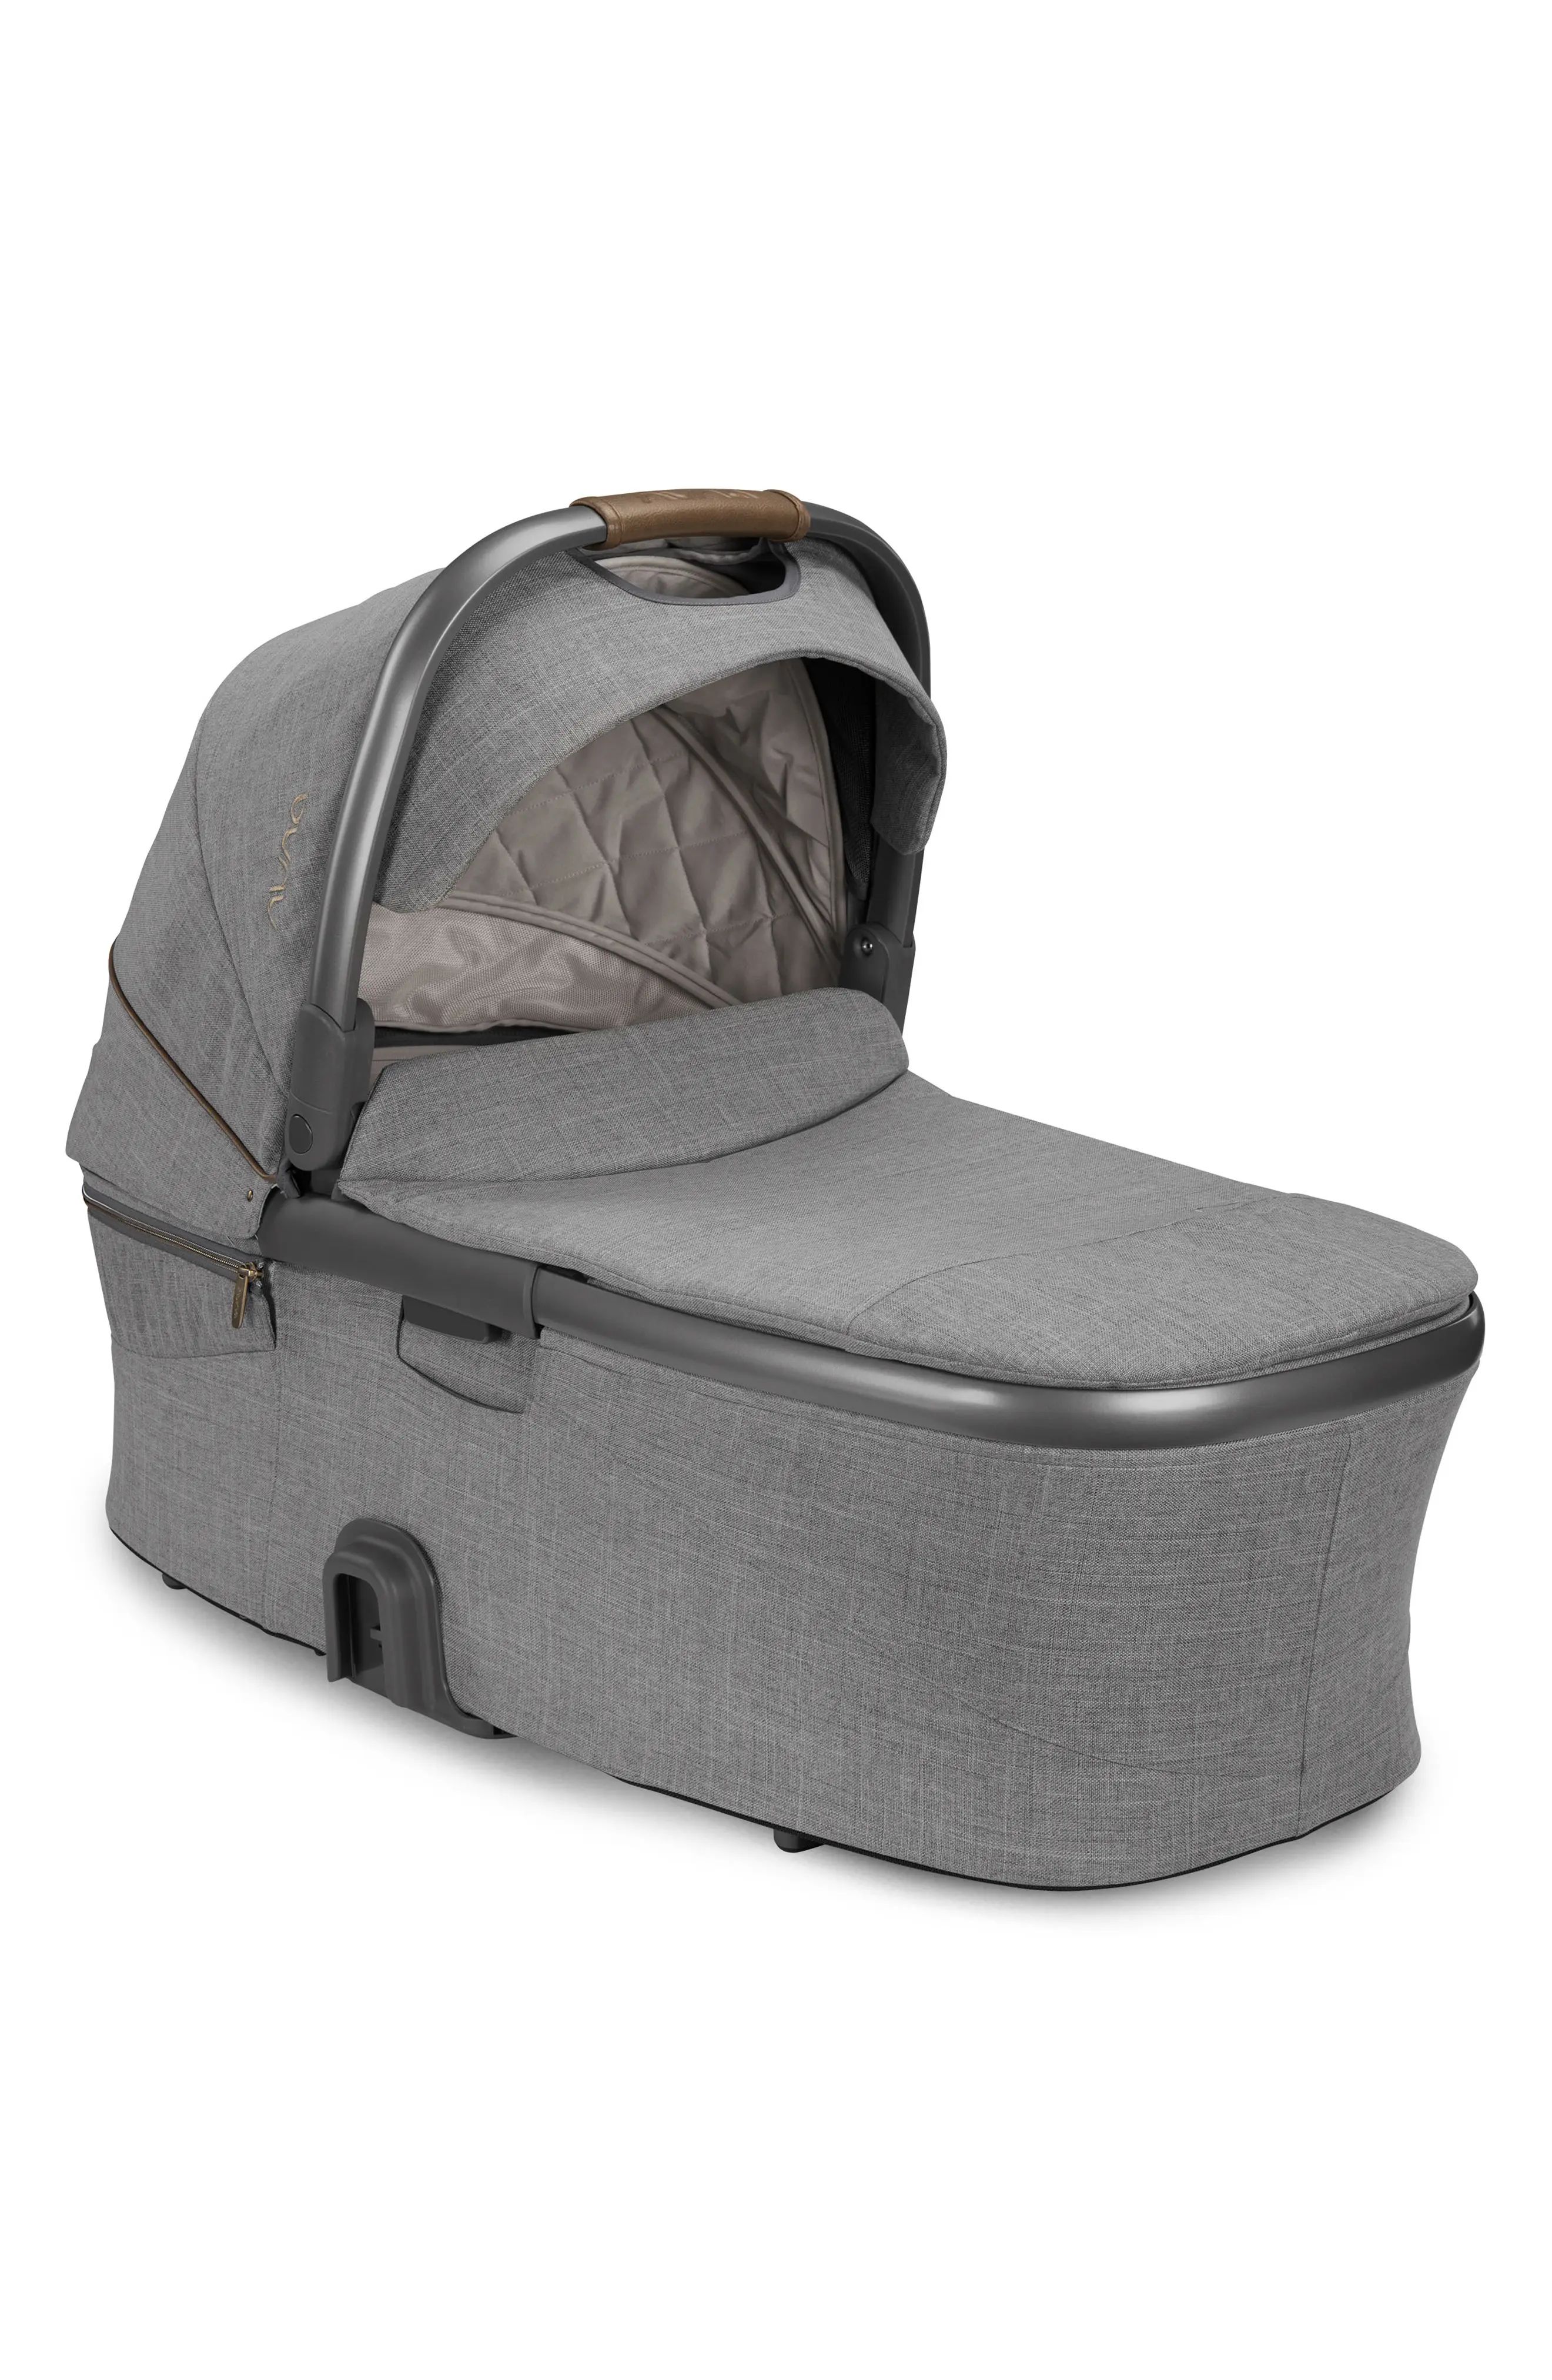 DEMI Grow Bassinet for nuna DEMI Grow Stroller in Refined at Nordstrom | Nordstrom